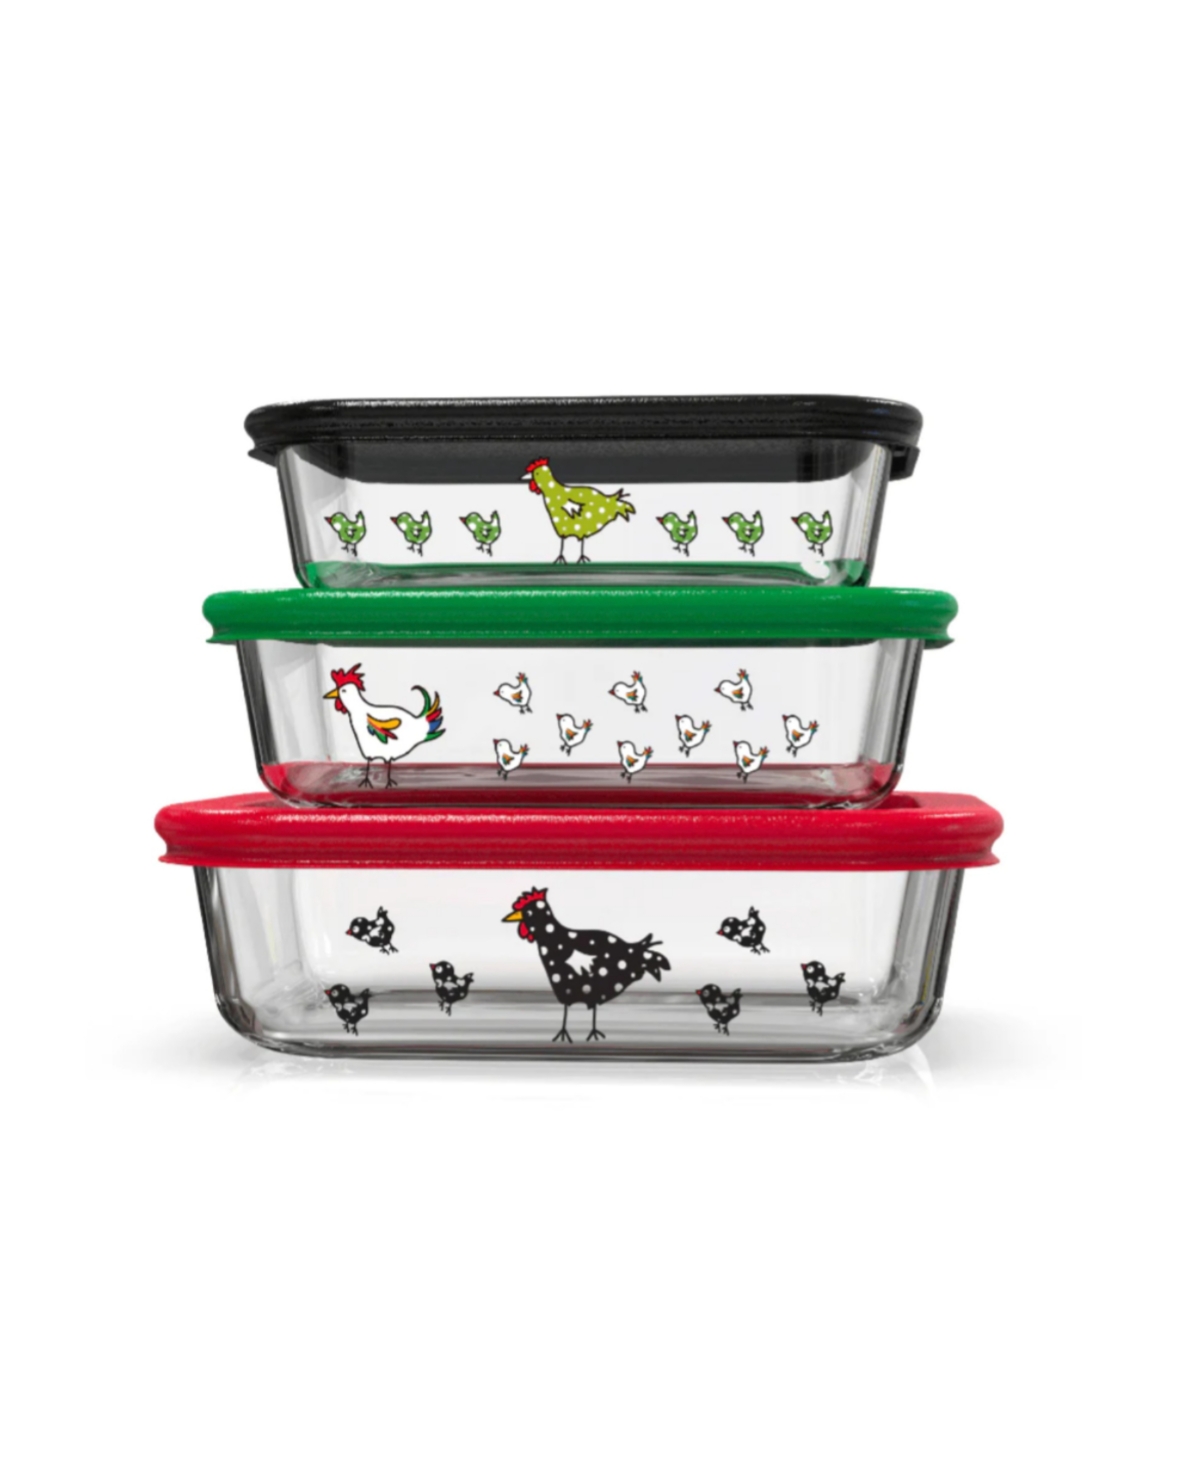 Genicook 3 Pc Rectangular Container Borosilicate Glass Nesting Container Set With Snap-on Lids In Multicolor